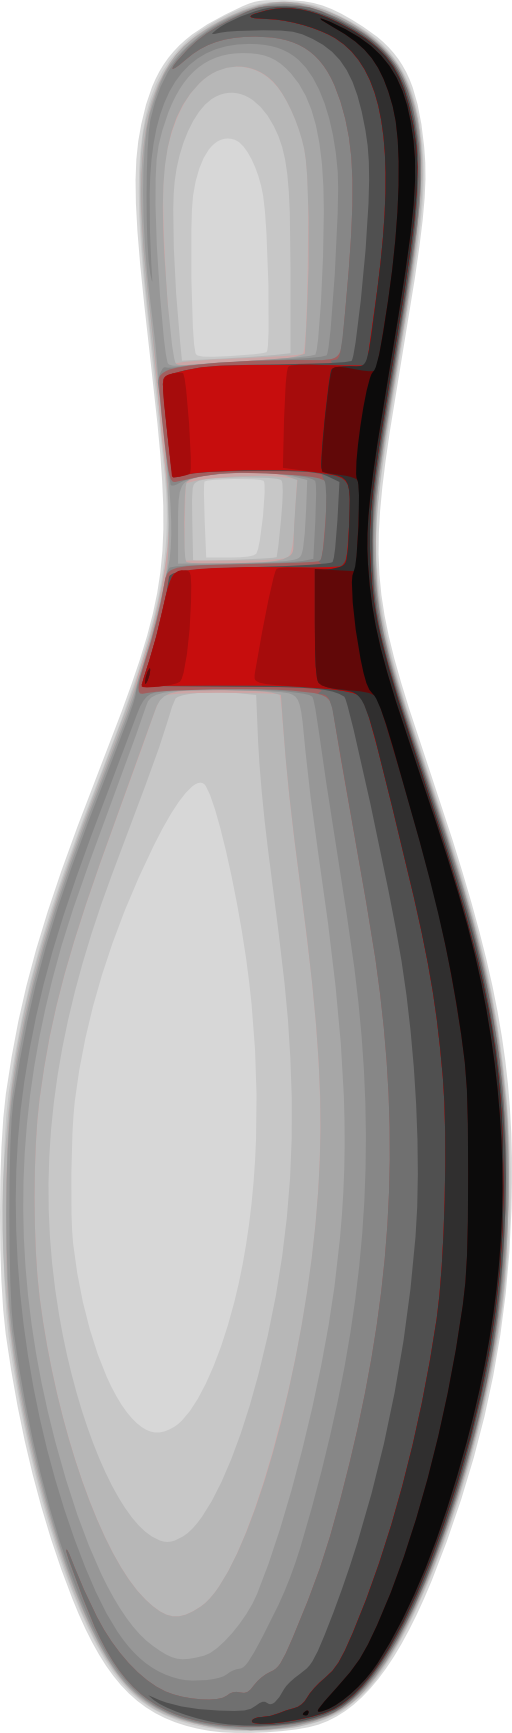 Bowling Pin Clipart   I2clipart   Royalty Free Public Domain Clipart